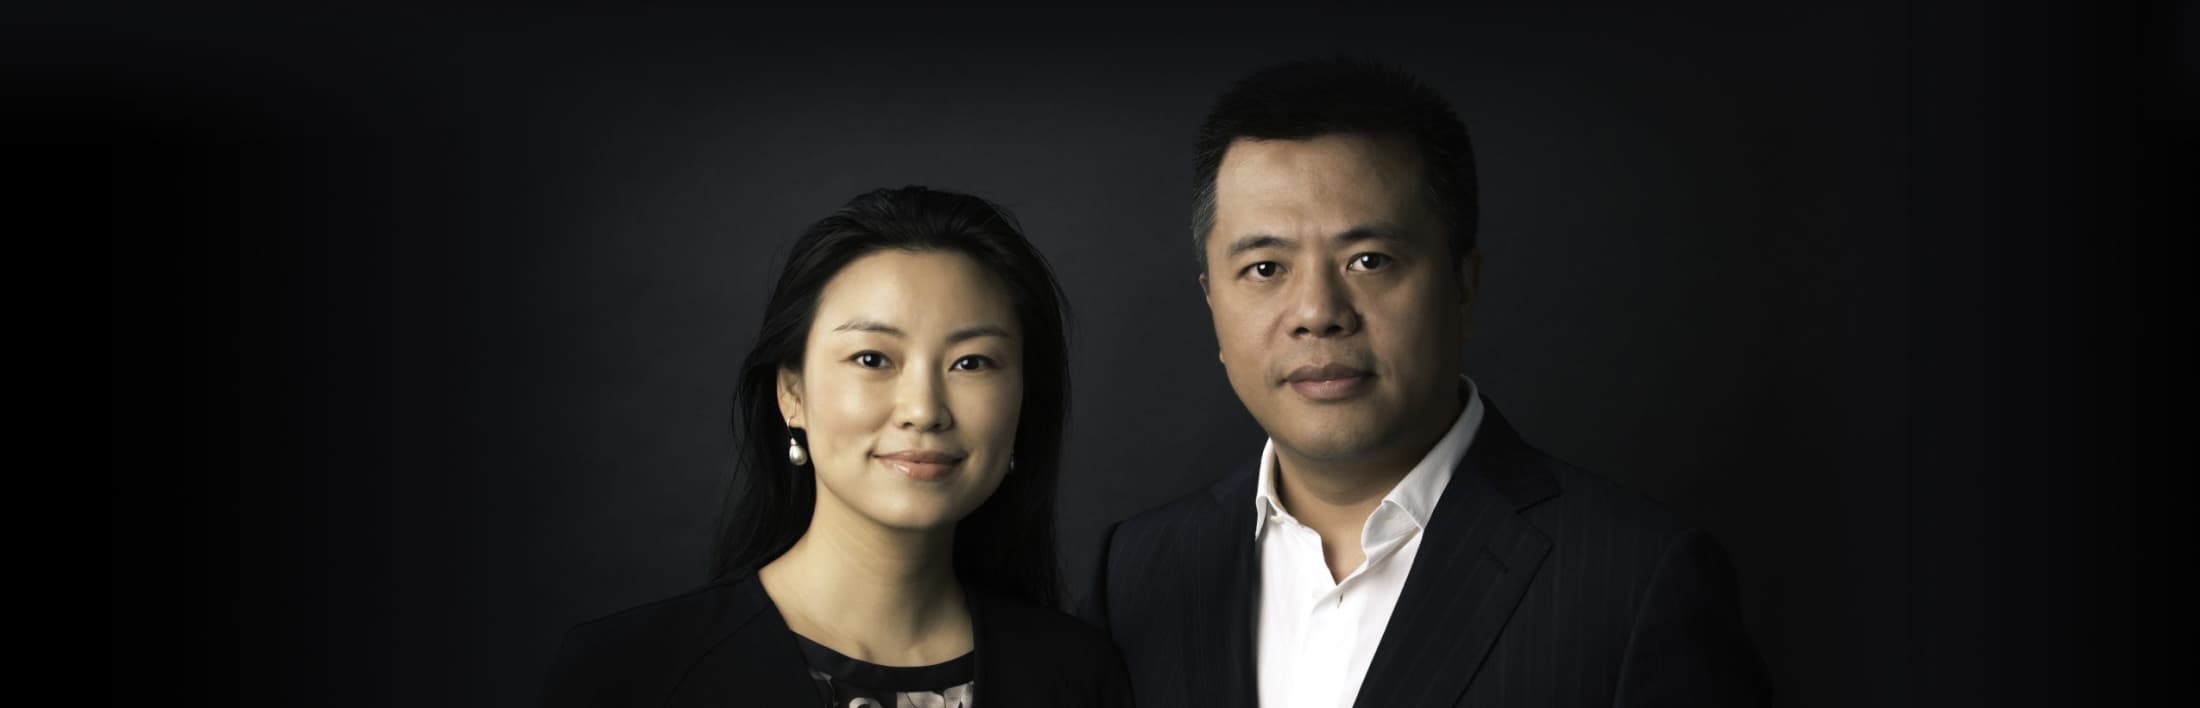 A letter from Tianqiao Chen and Chrissy Luo